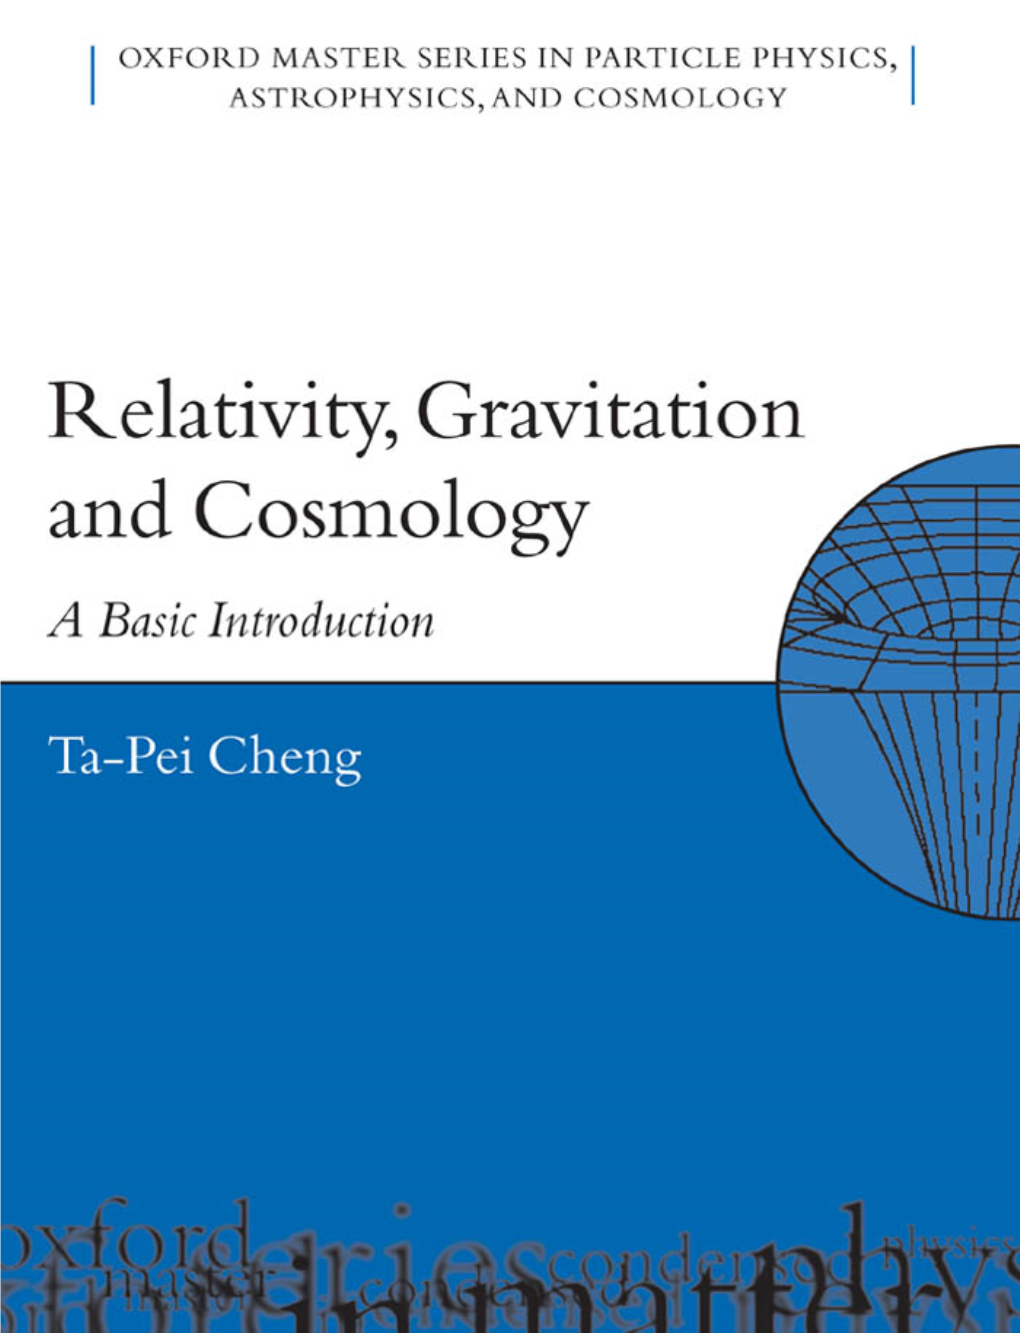 Relativity, Gravitation, and Cosmology STATISTICAL, COMPUTATIONAL, and THEORETICAL PHYSICS 12